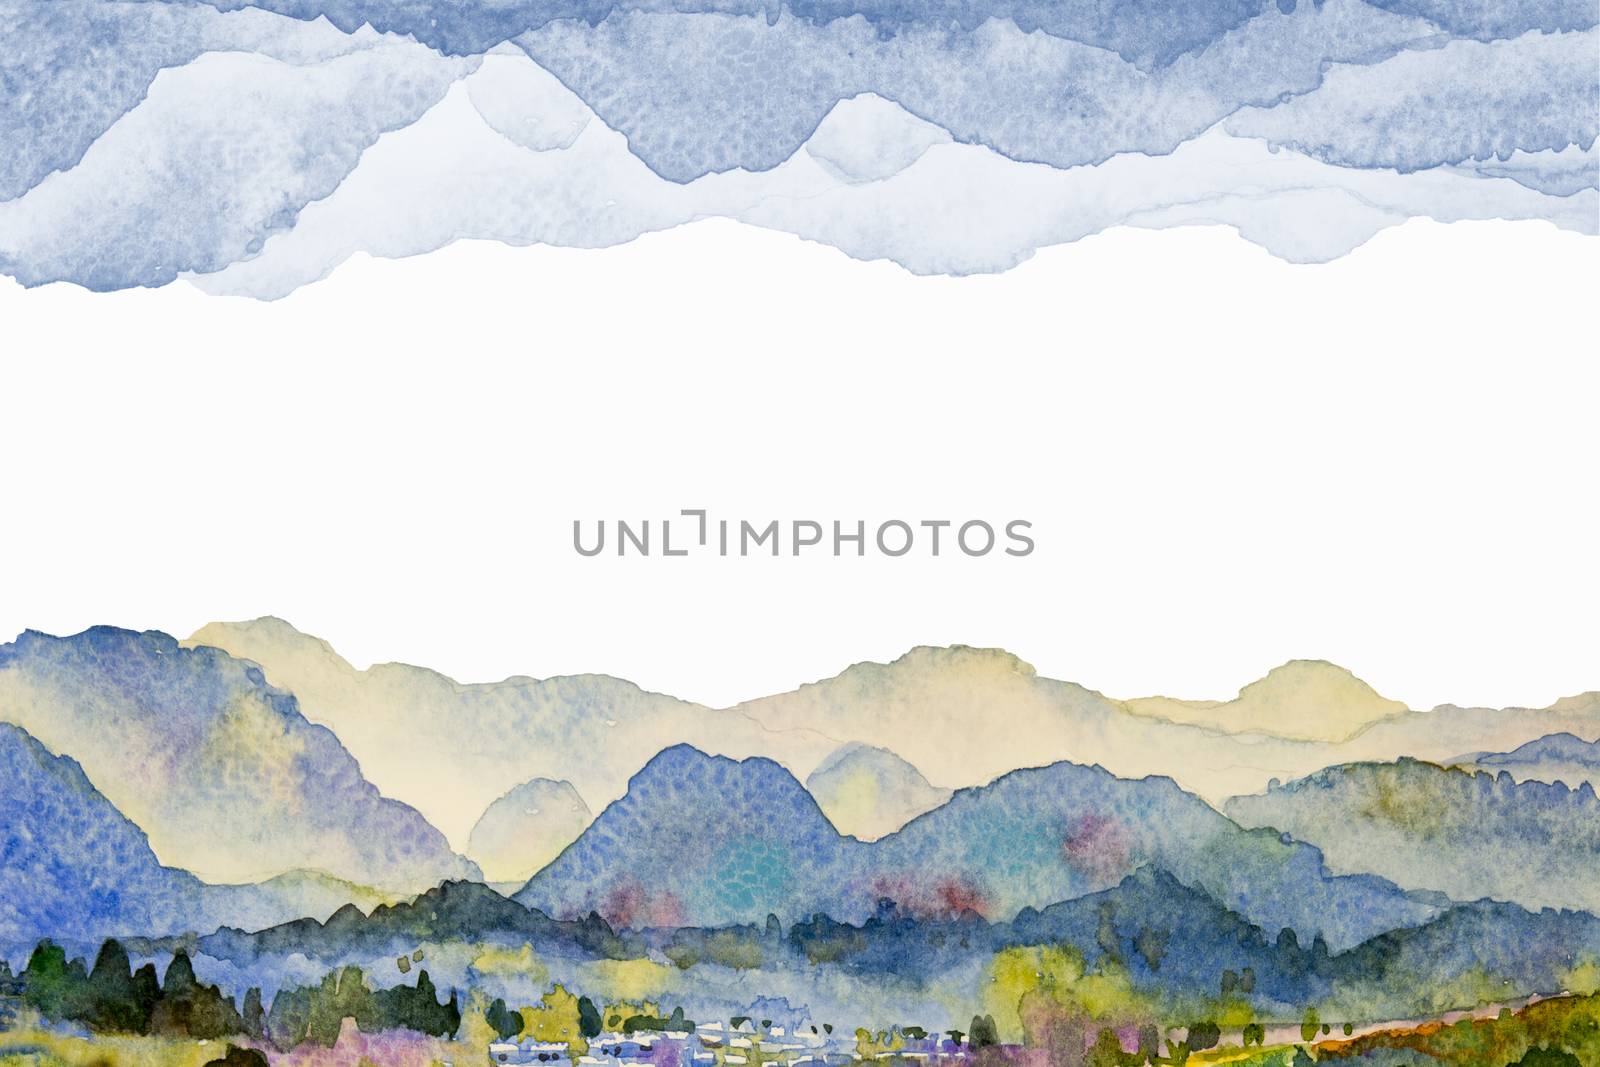 Watercolor landscape painting colorful of mountain meadow with decoration in the Panorama top view and emotion rural society, nature beauty whtie background. Hand painted semi abstract illustration.